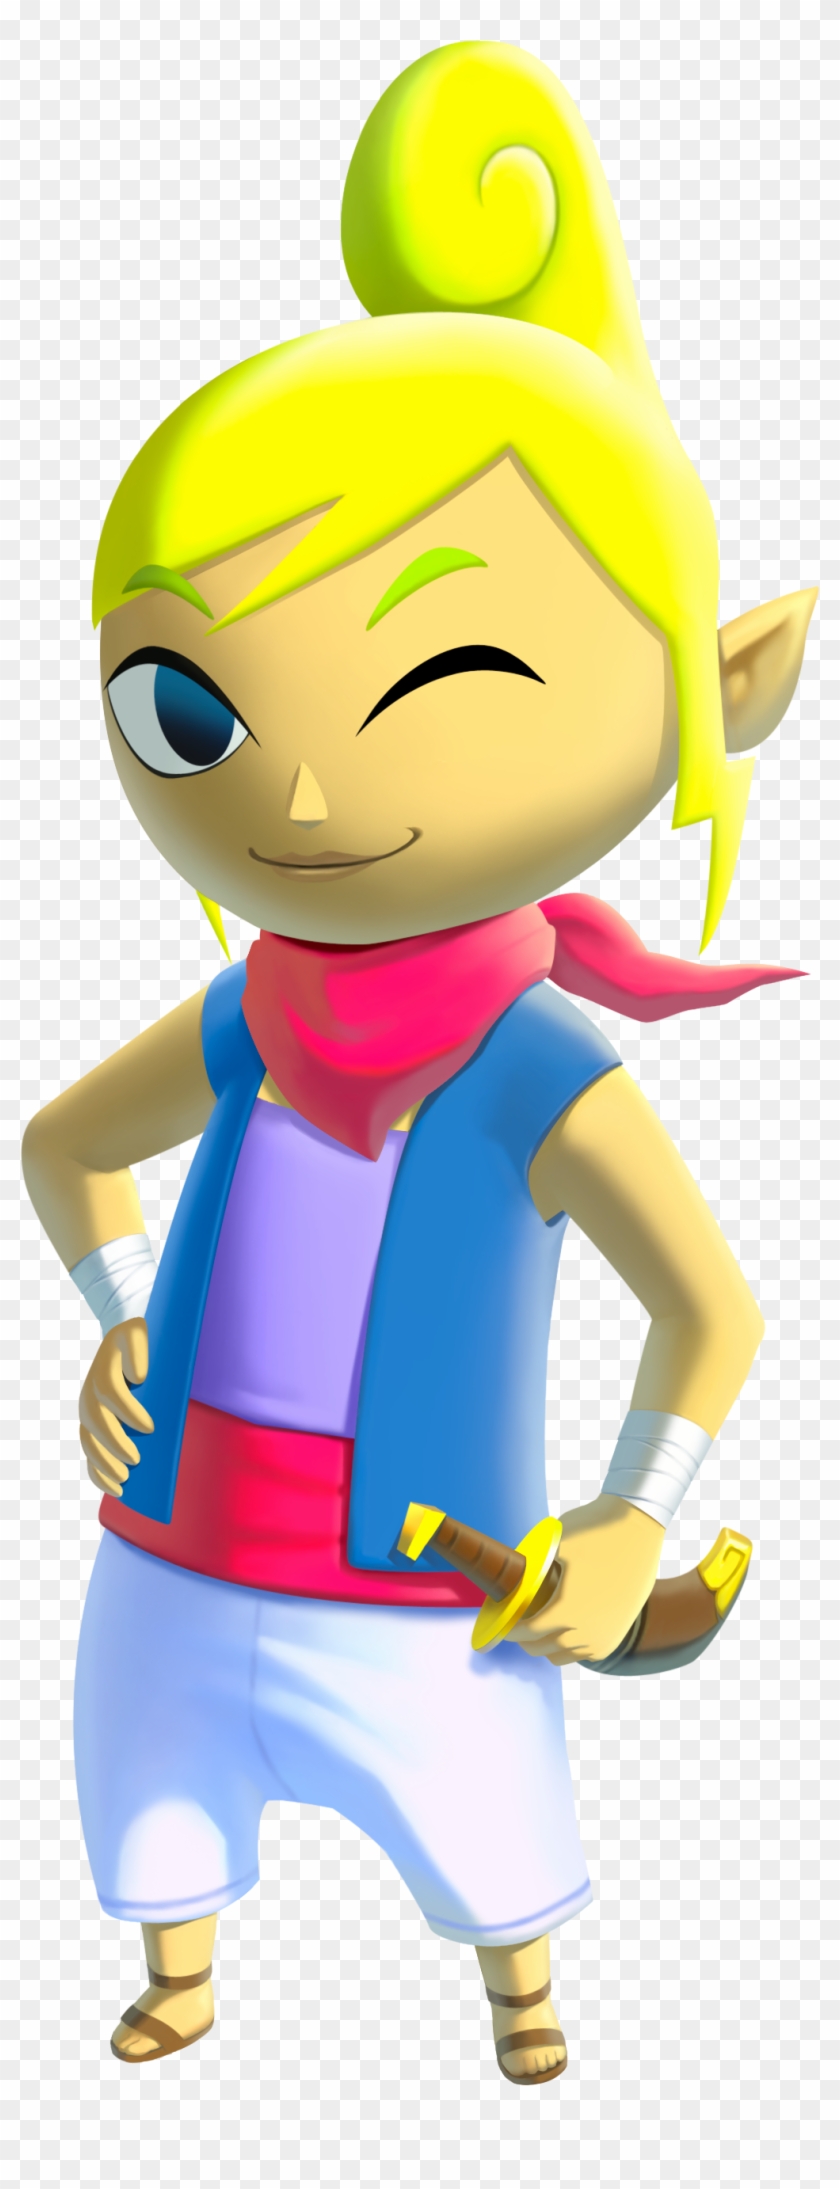 After Descending On Hyrule Field And Running Around - Zelda Wind Waker Pirate Clipart #1619690